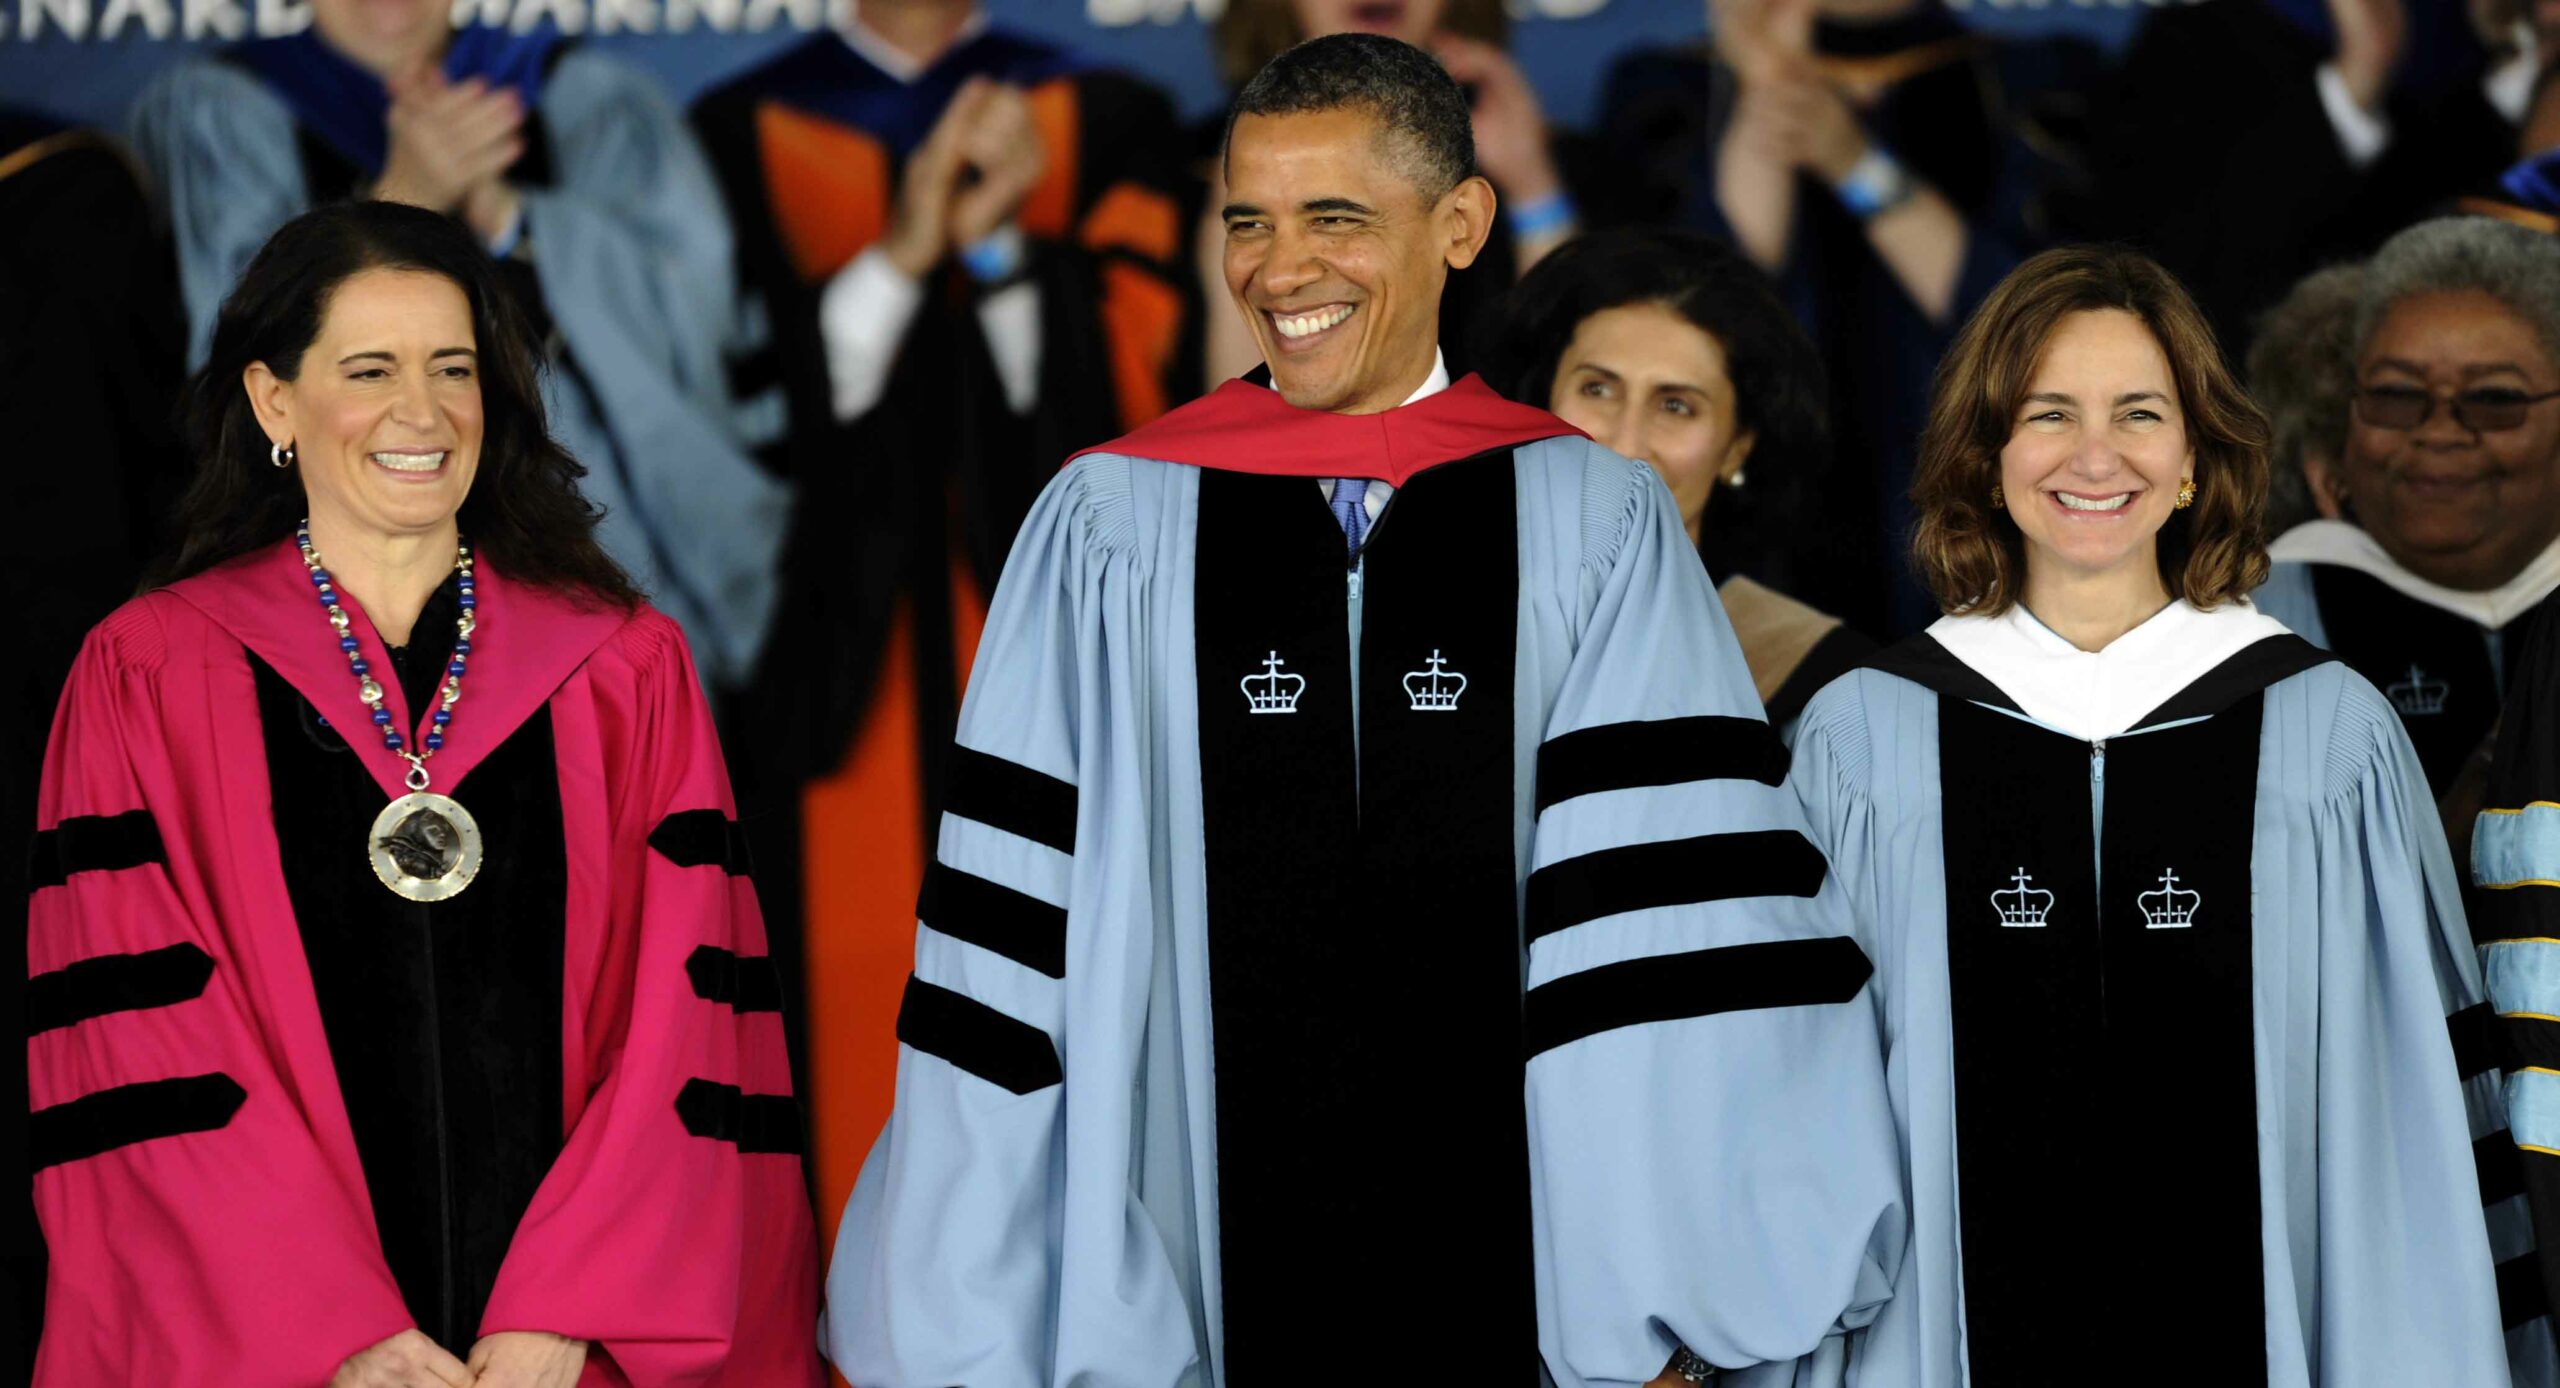 3 Meet The President Of Columbia University: A Look At Their Role And Impact